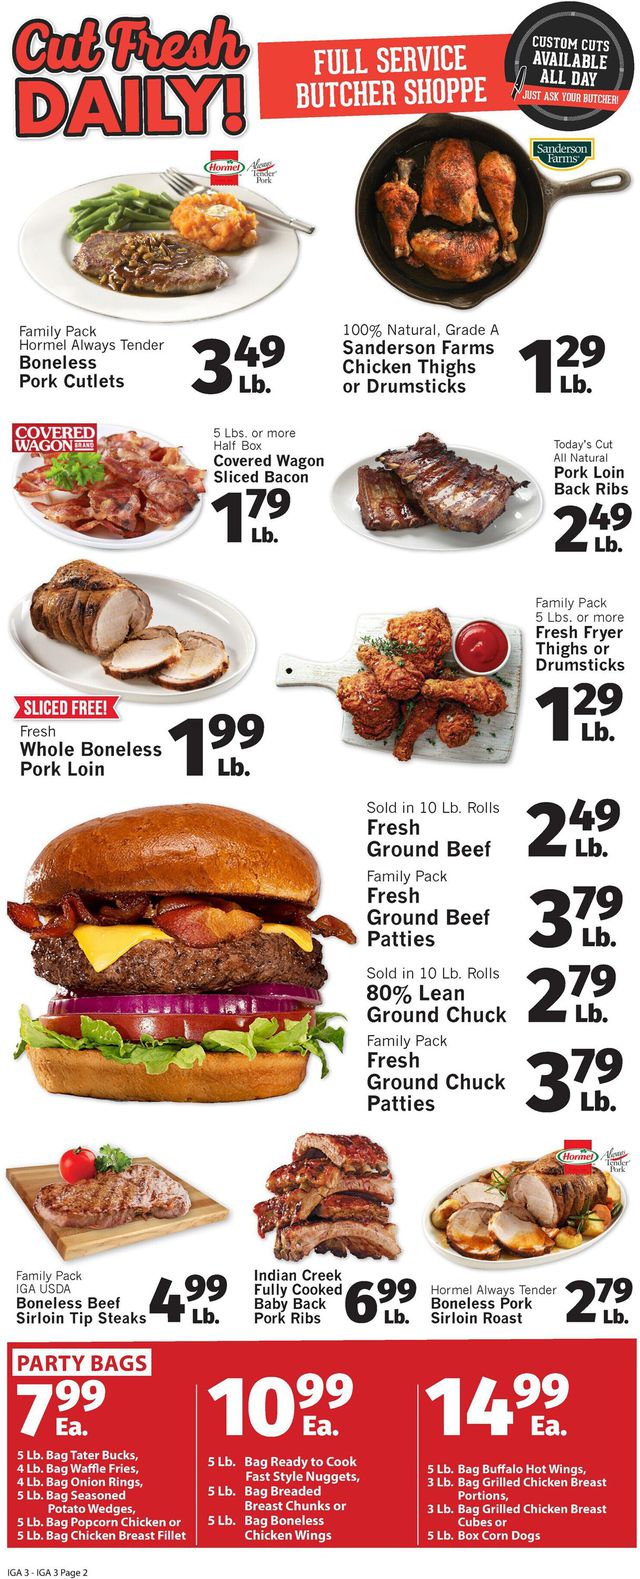 IGA Ad from 03/17/2021